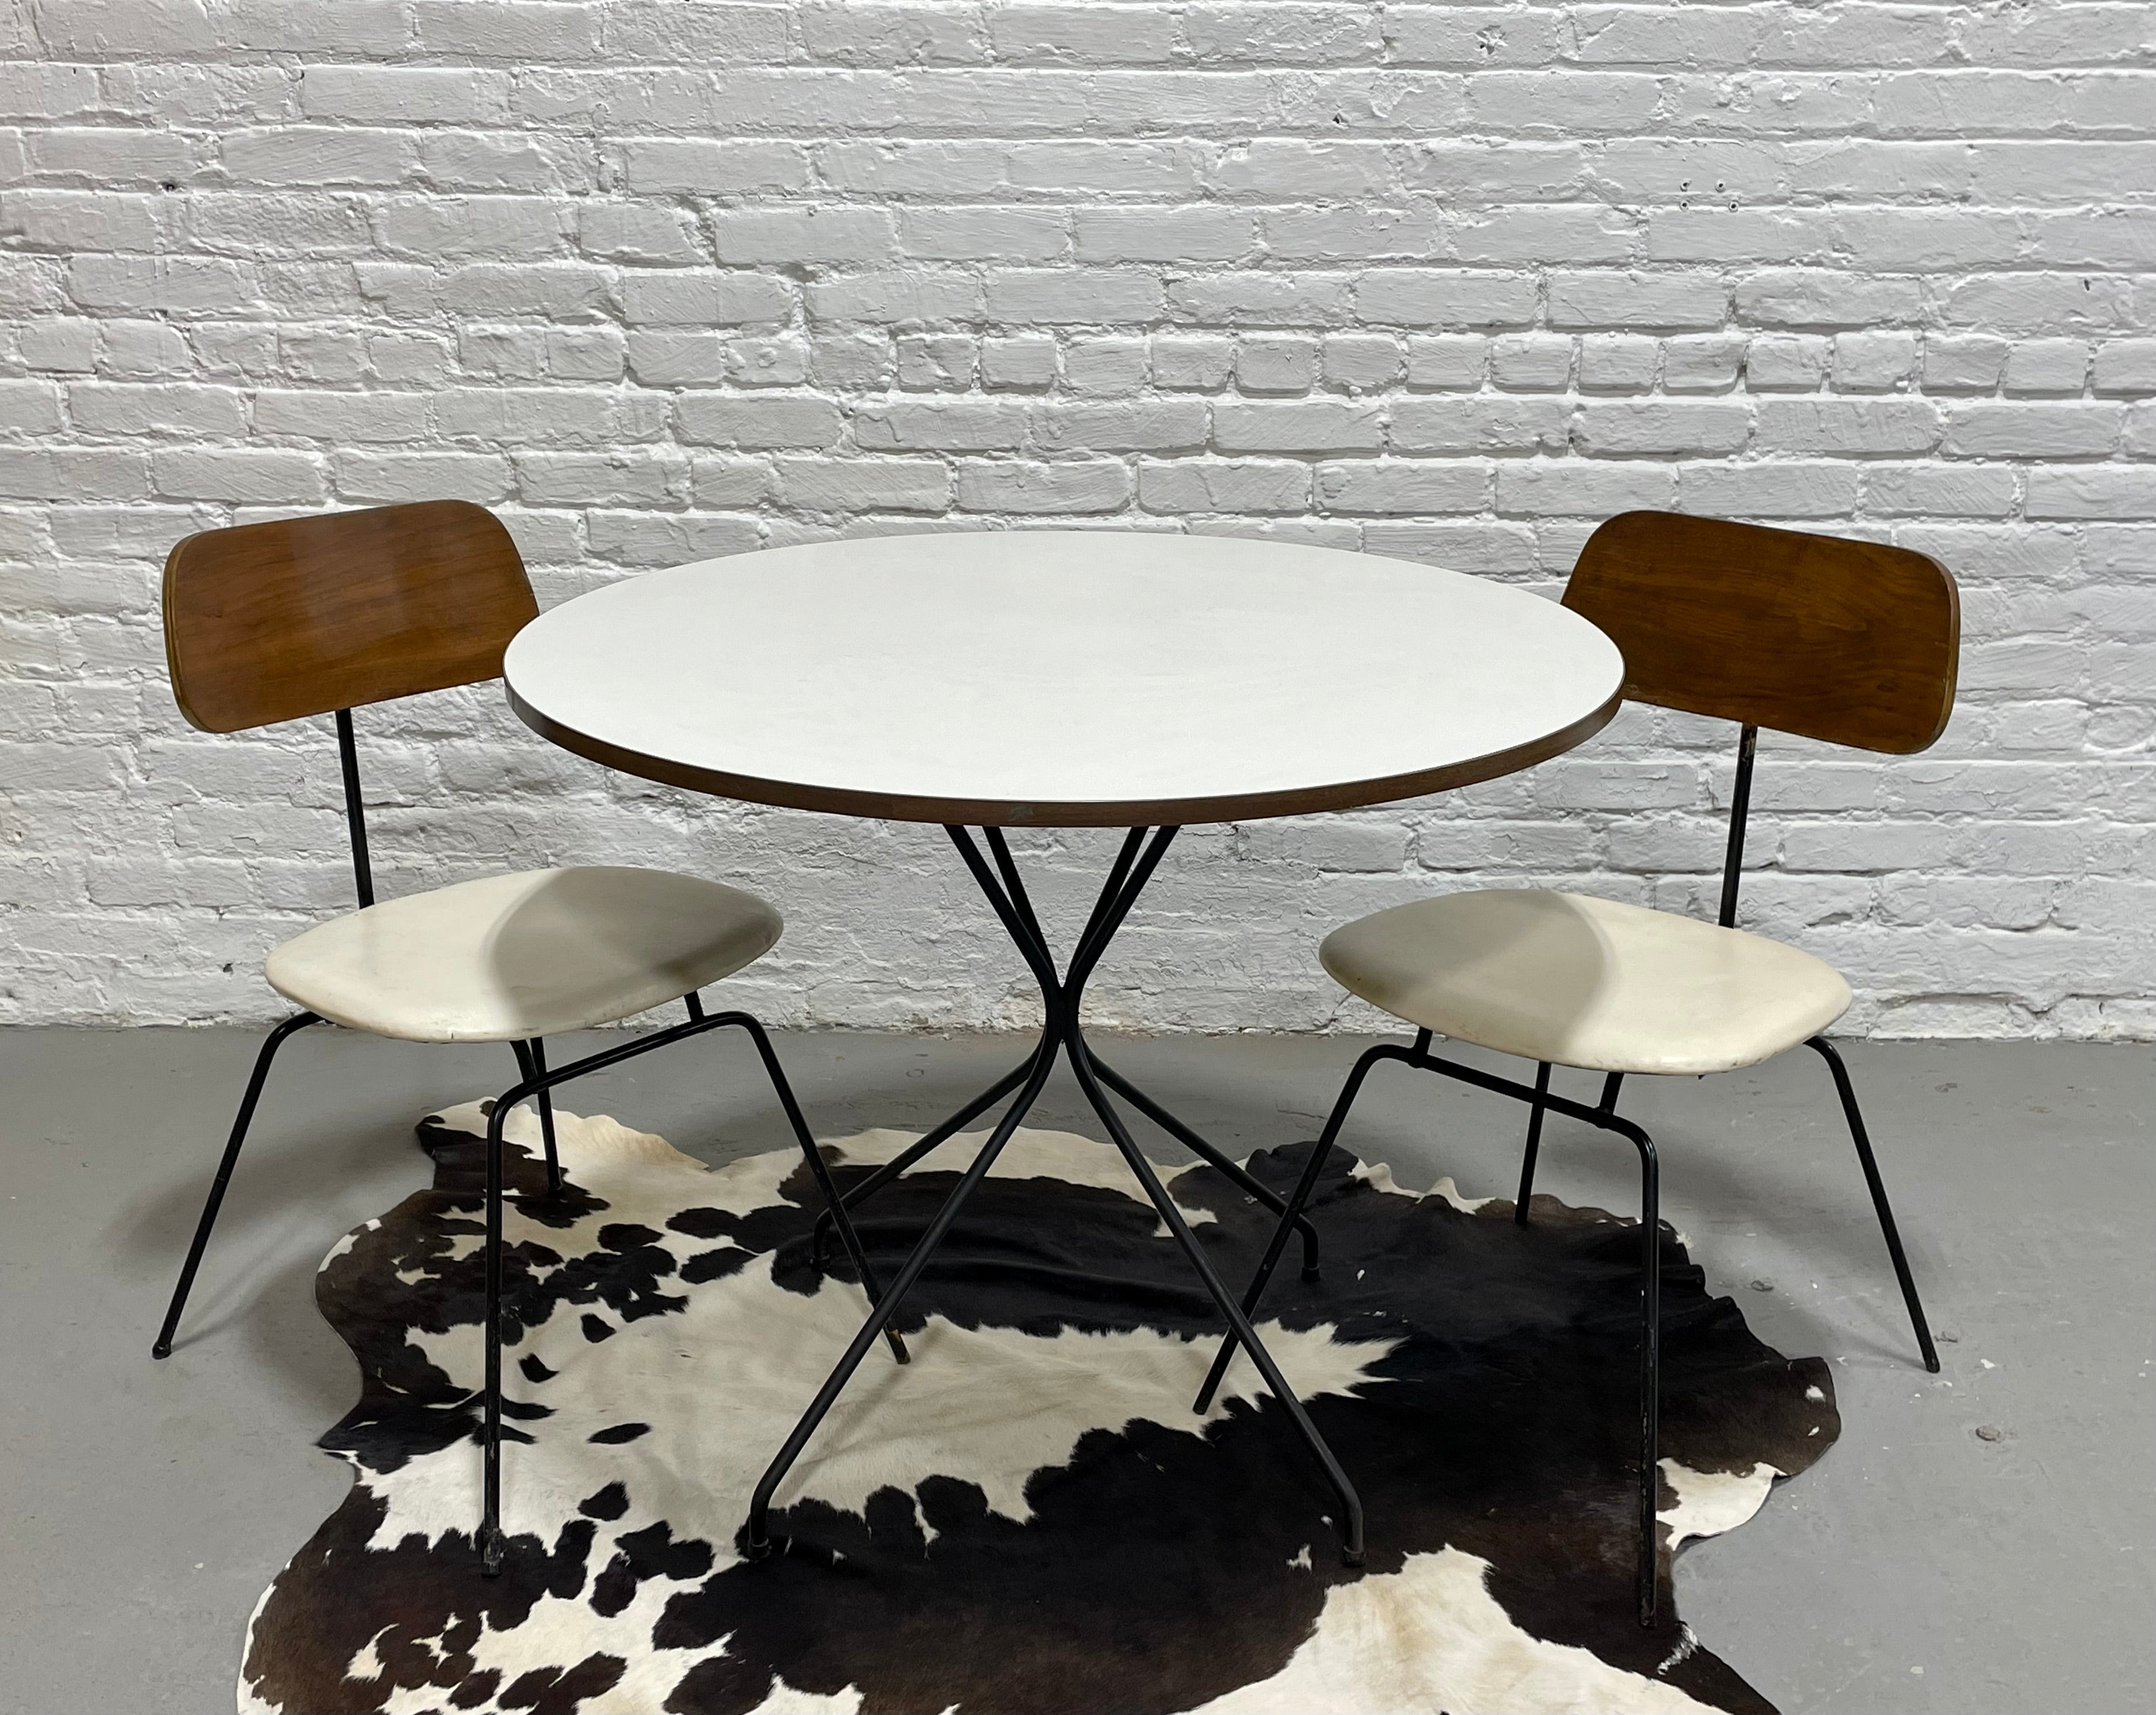 Mid Century Modern DINING TABLE styled after Clifford PASCOE, c. 1960's